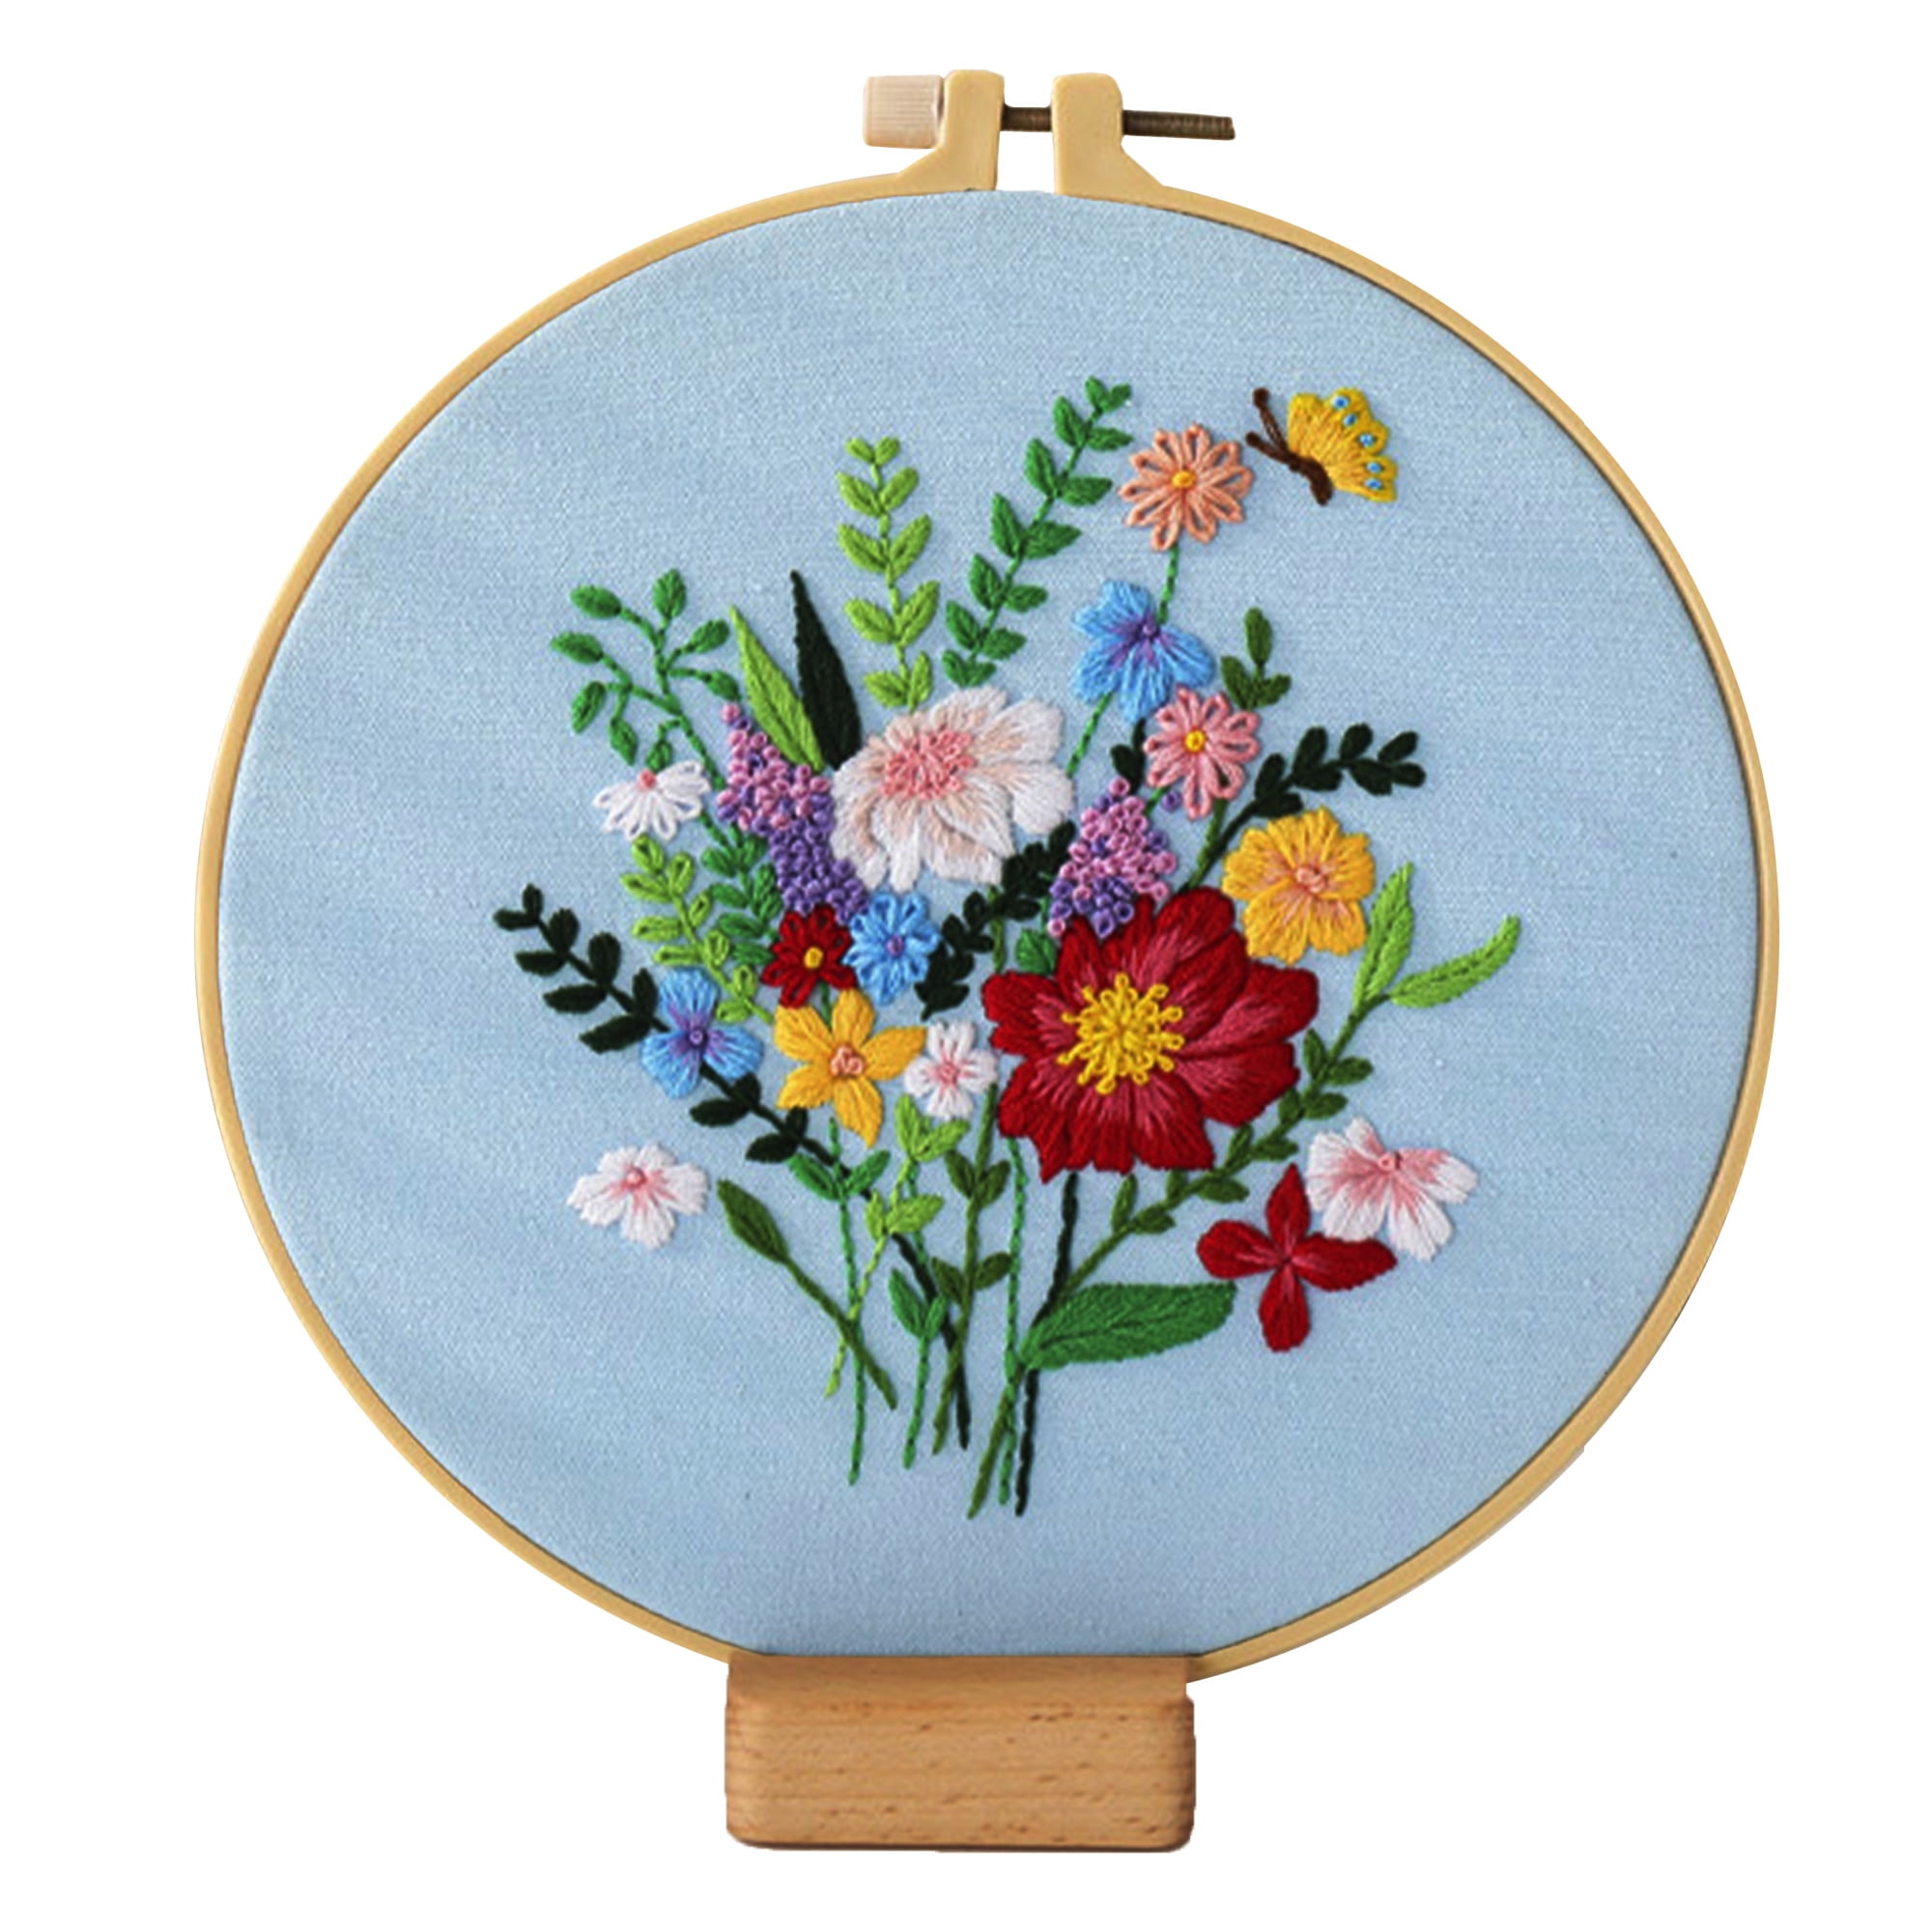 Sublime Stitching The Ultimate Embroidery Kit - Fantasy Flowers